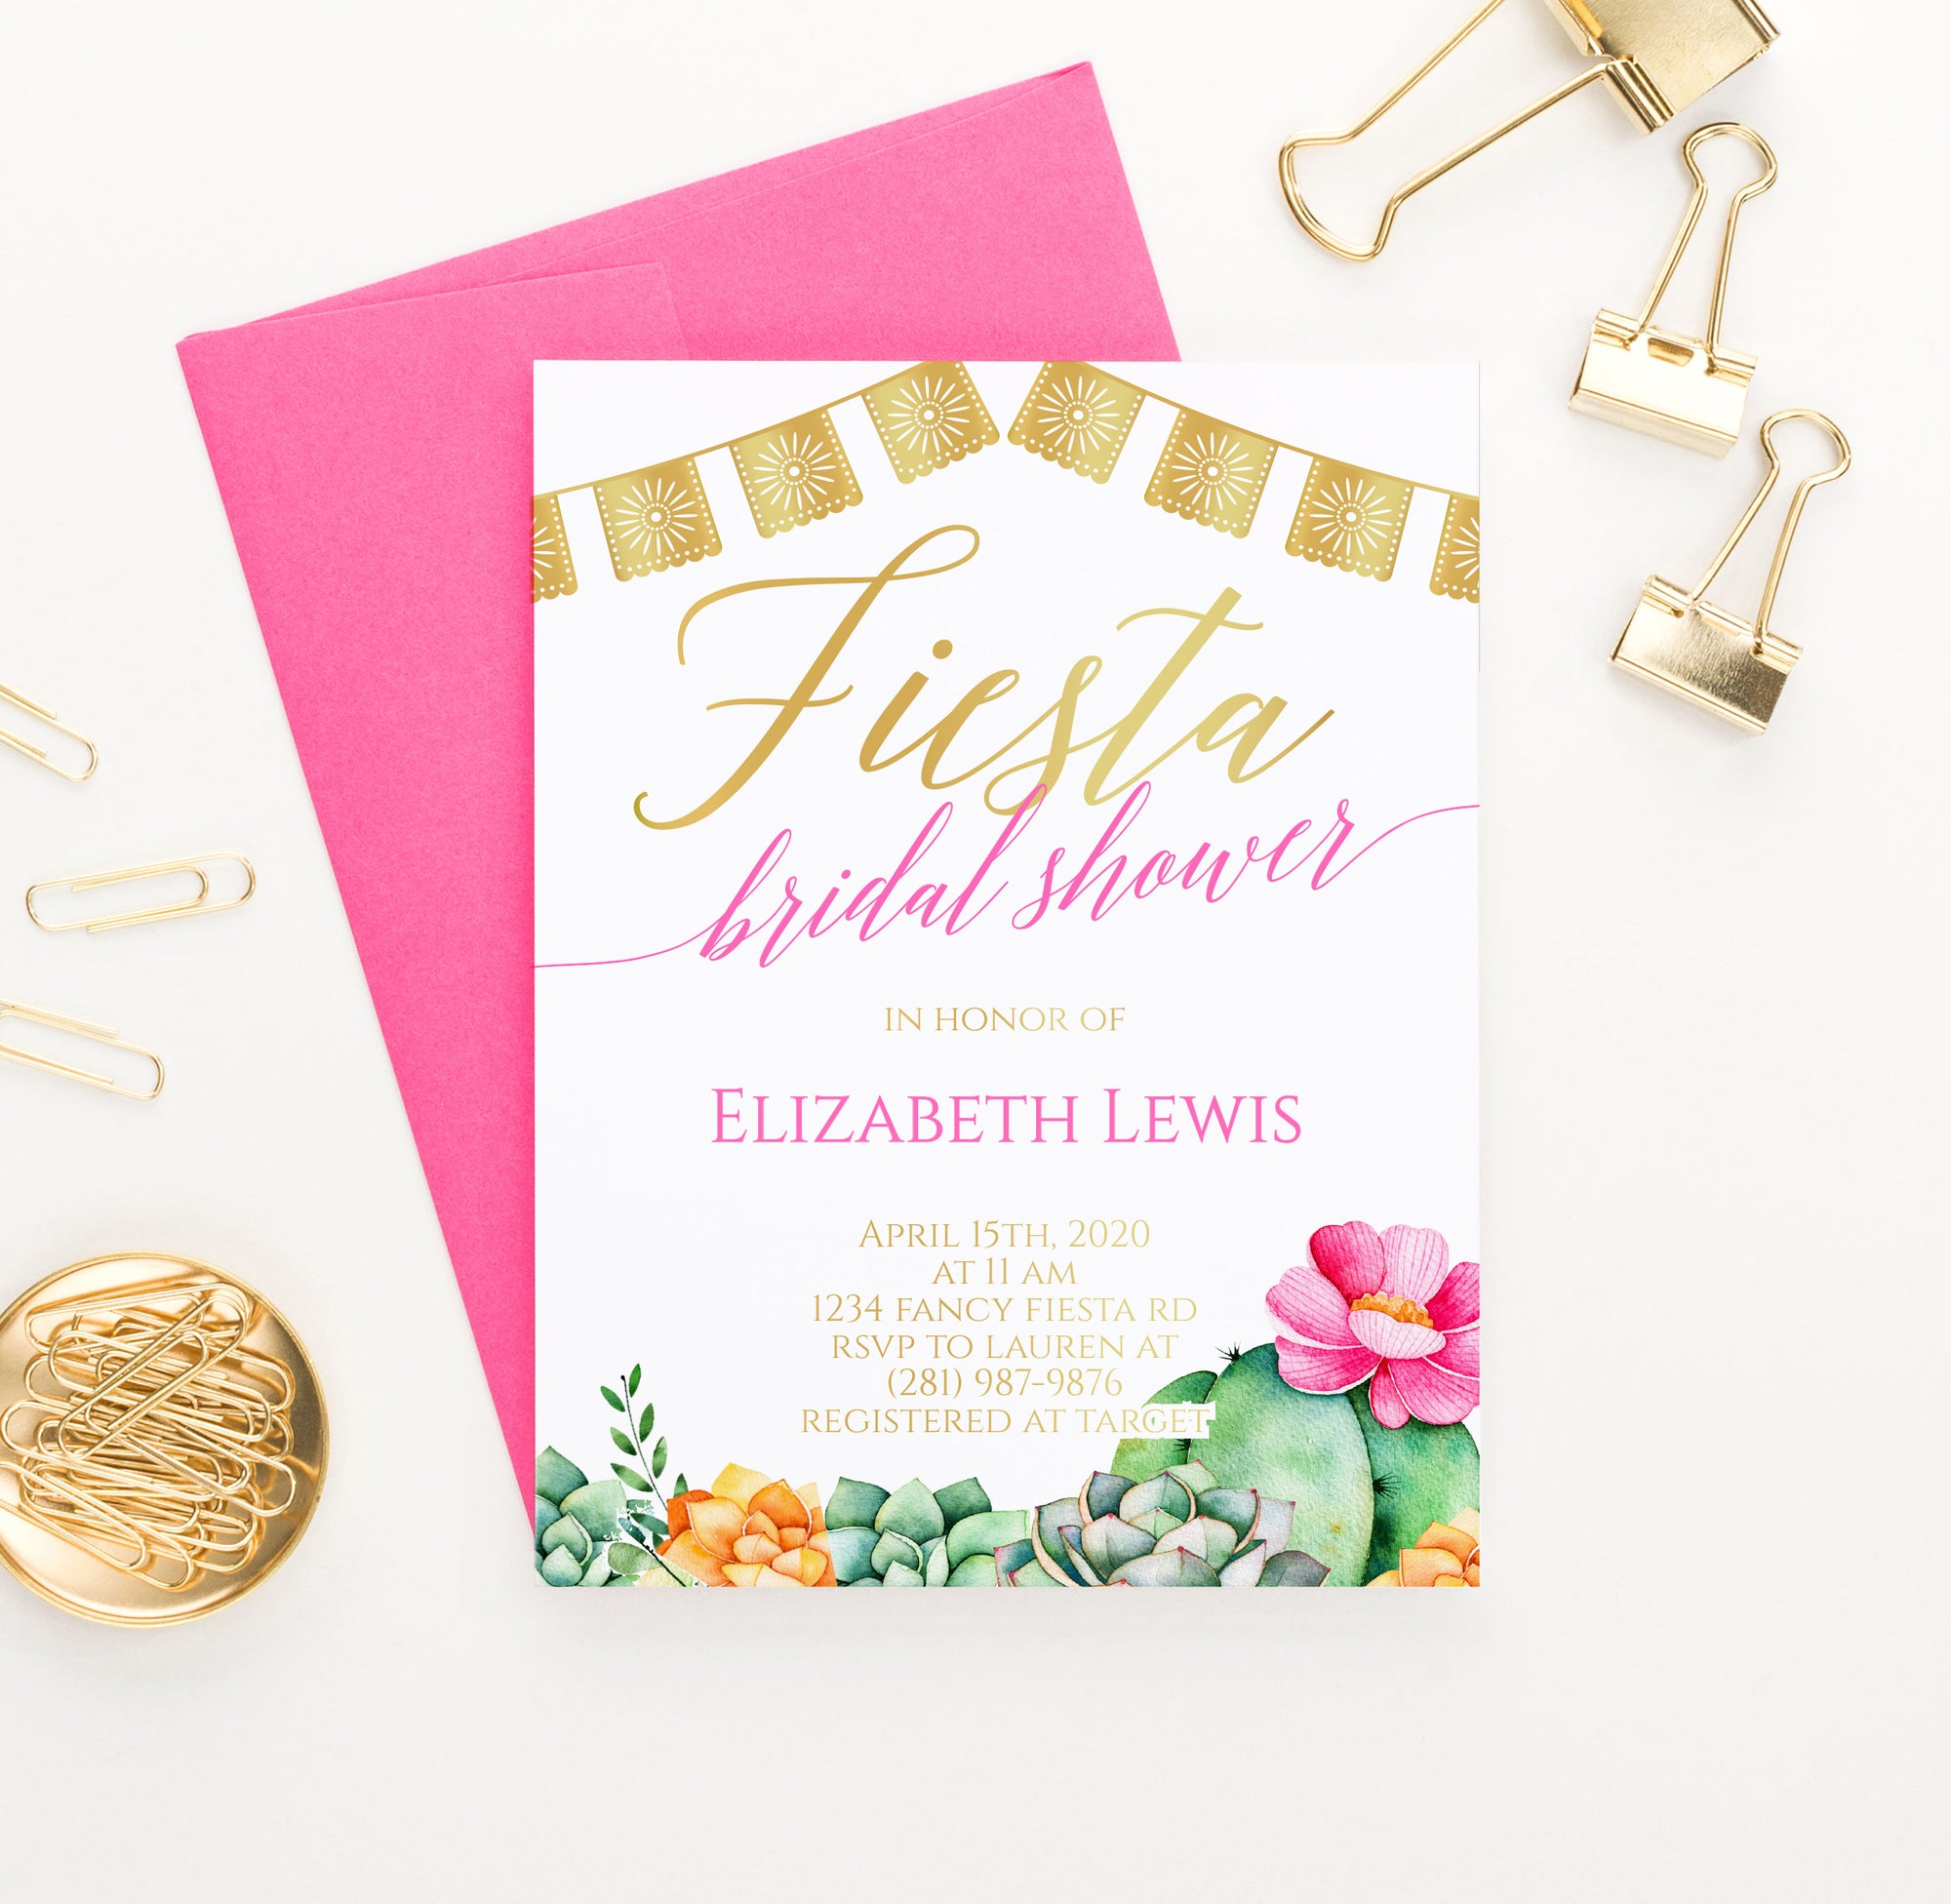 Personalized Fiesta Bridal Shower Invitations With Succulents